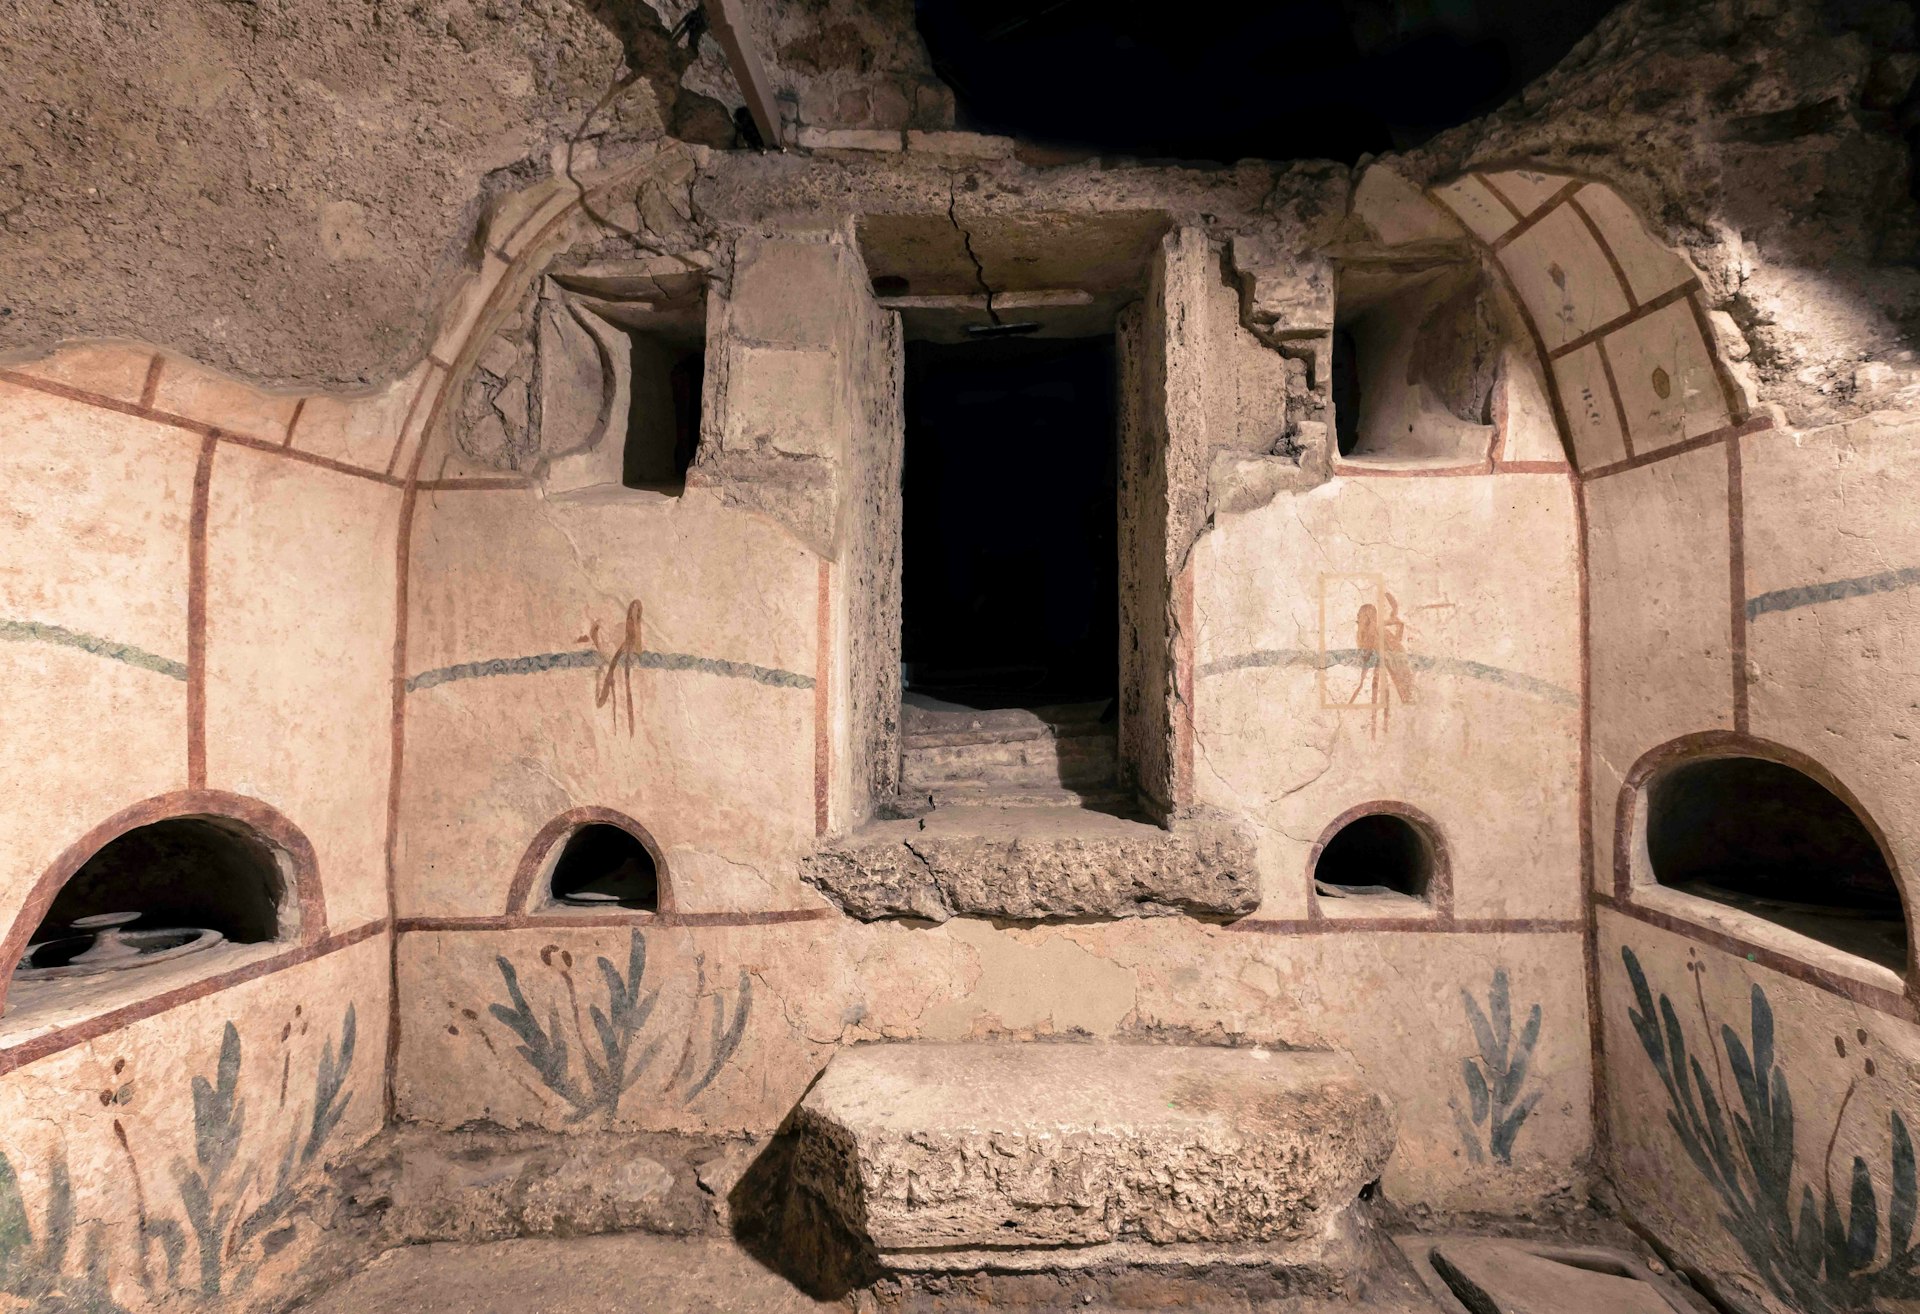 The entrance to an Ancient Roman burial tomb adorned with frescoes